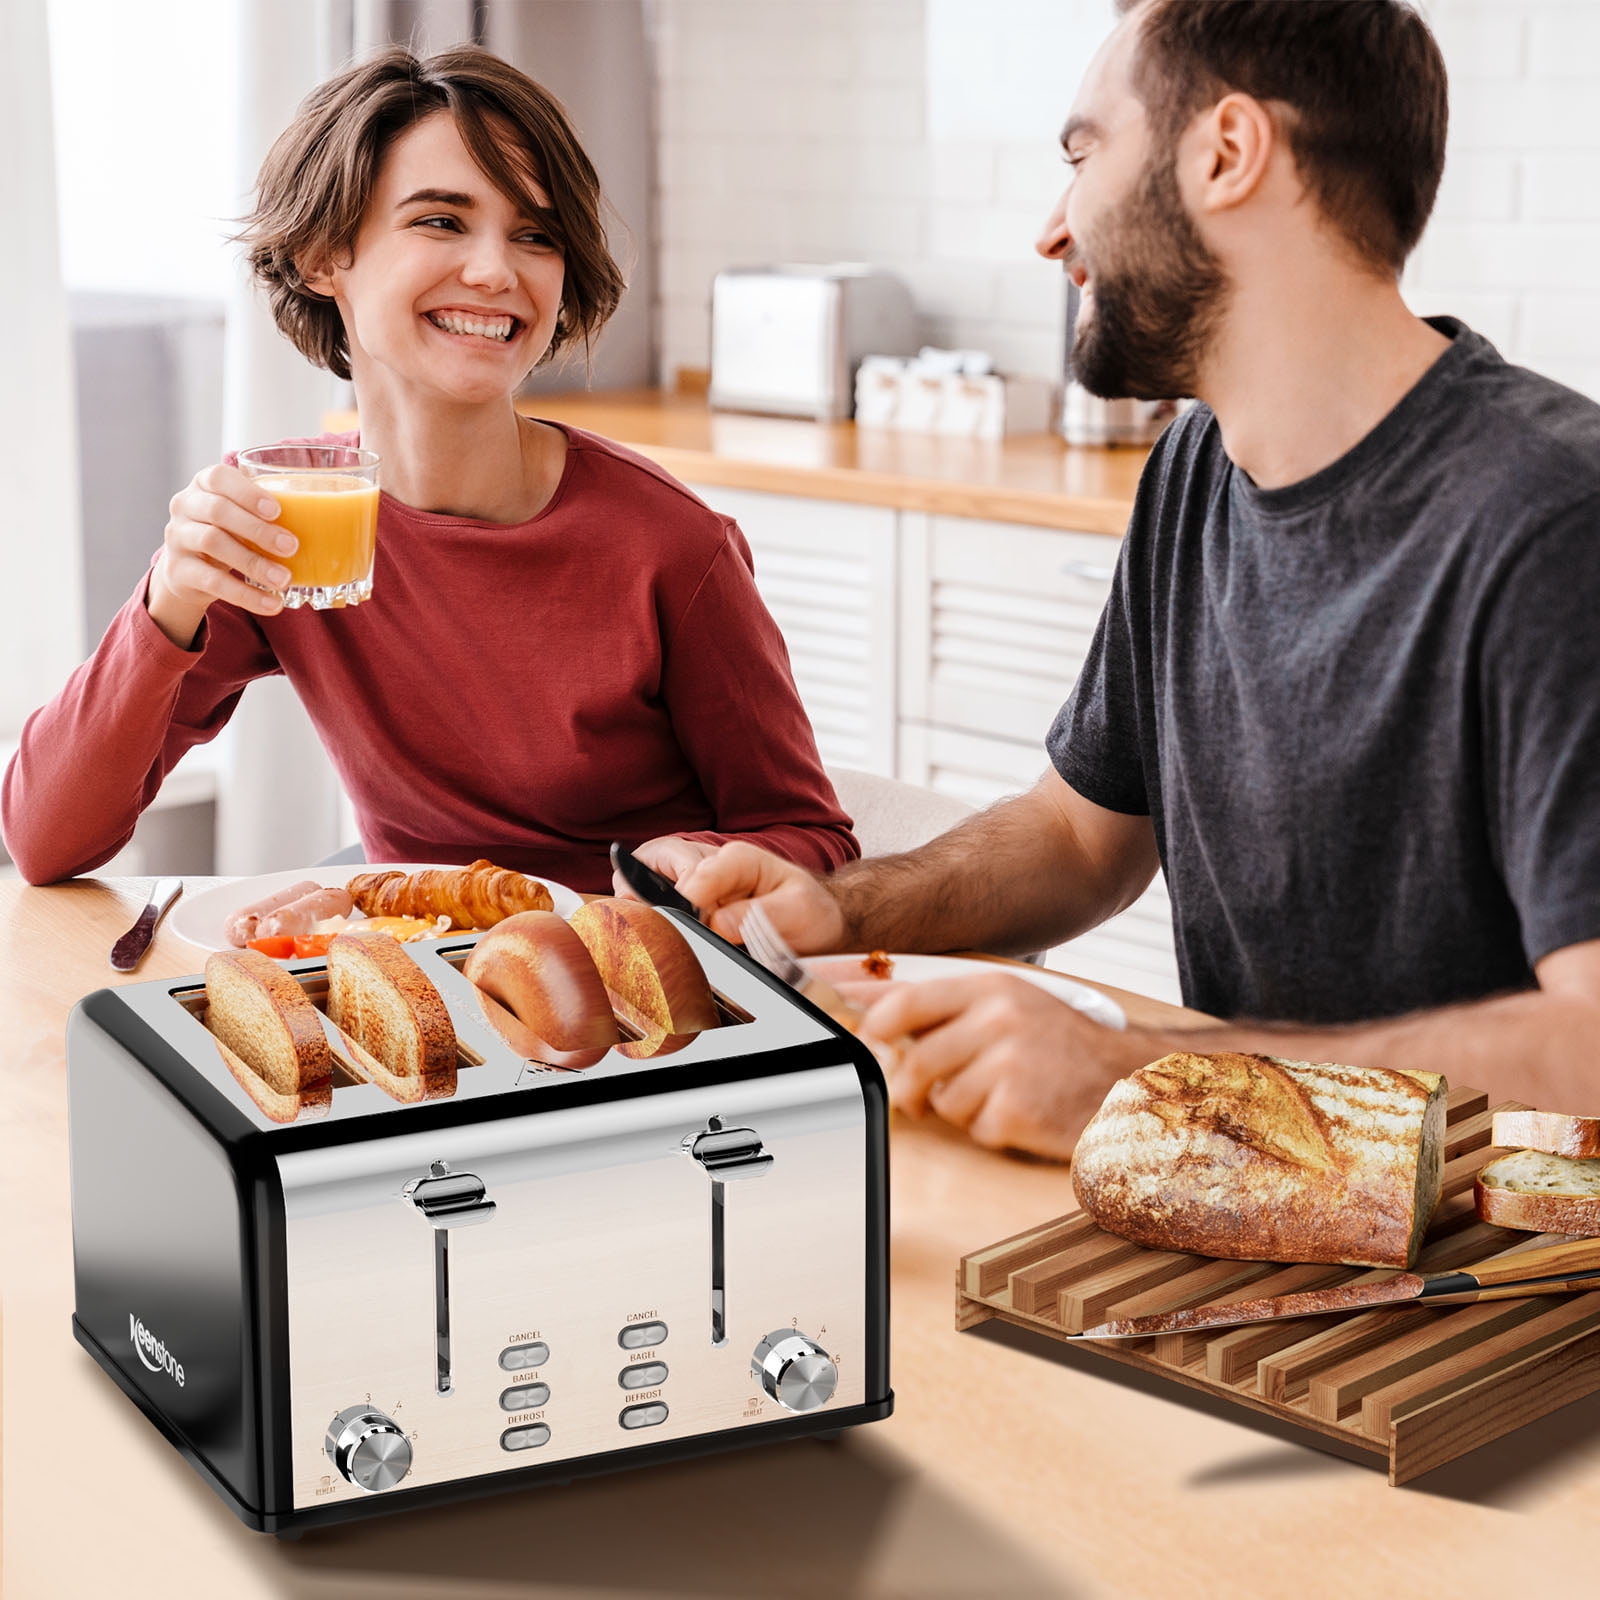 Keenstone Toaster 4 Slice, Stainless Steel Toasters with Timer, Wide Slot,  Bagel/Defrost/Cancel Fuction, Removable Crumb Tray, sliver black